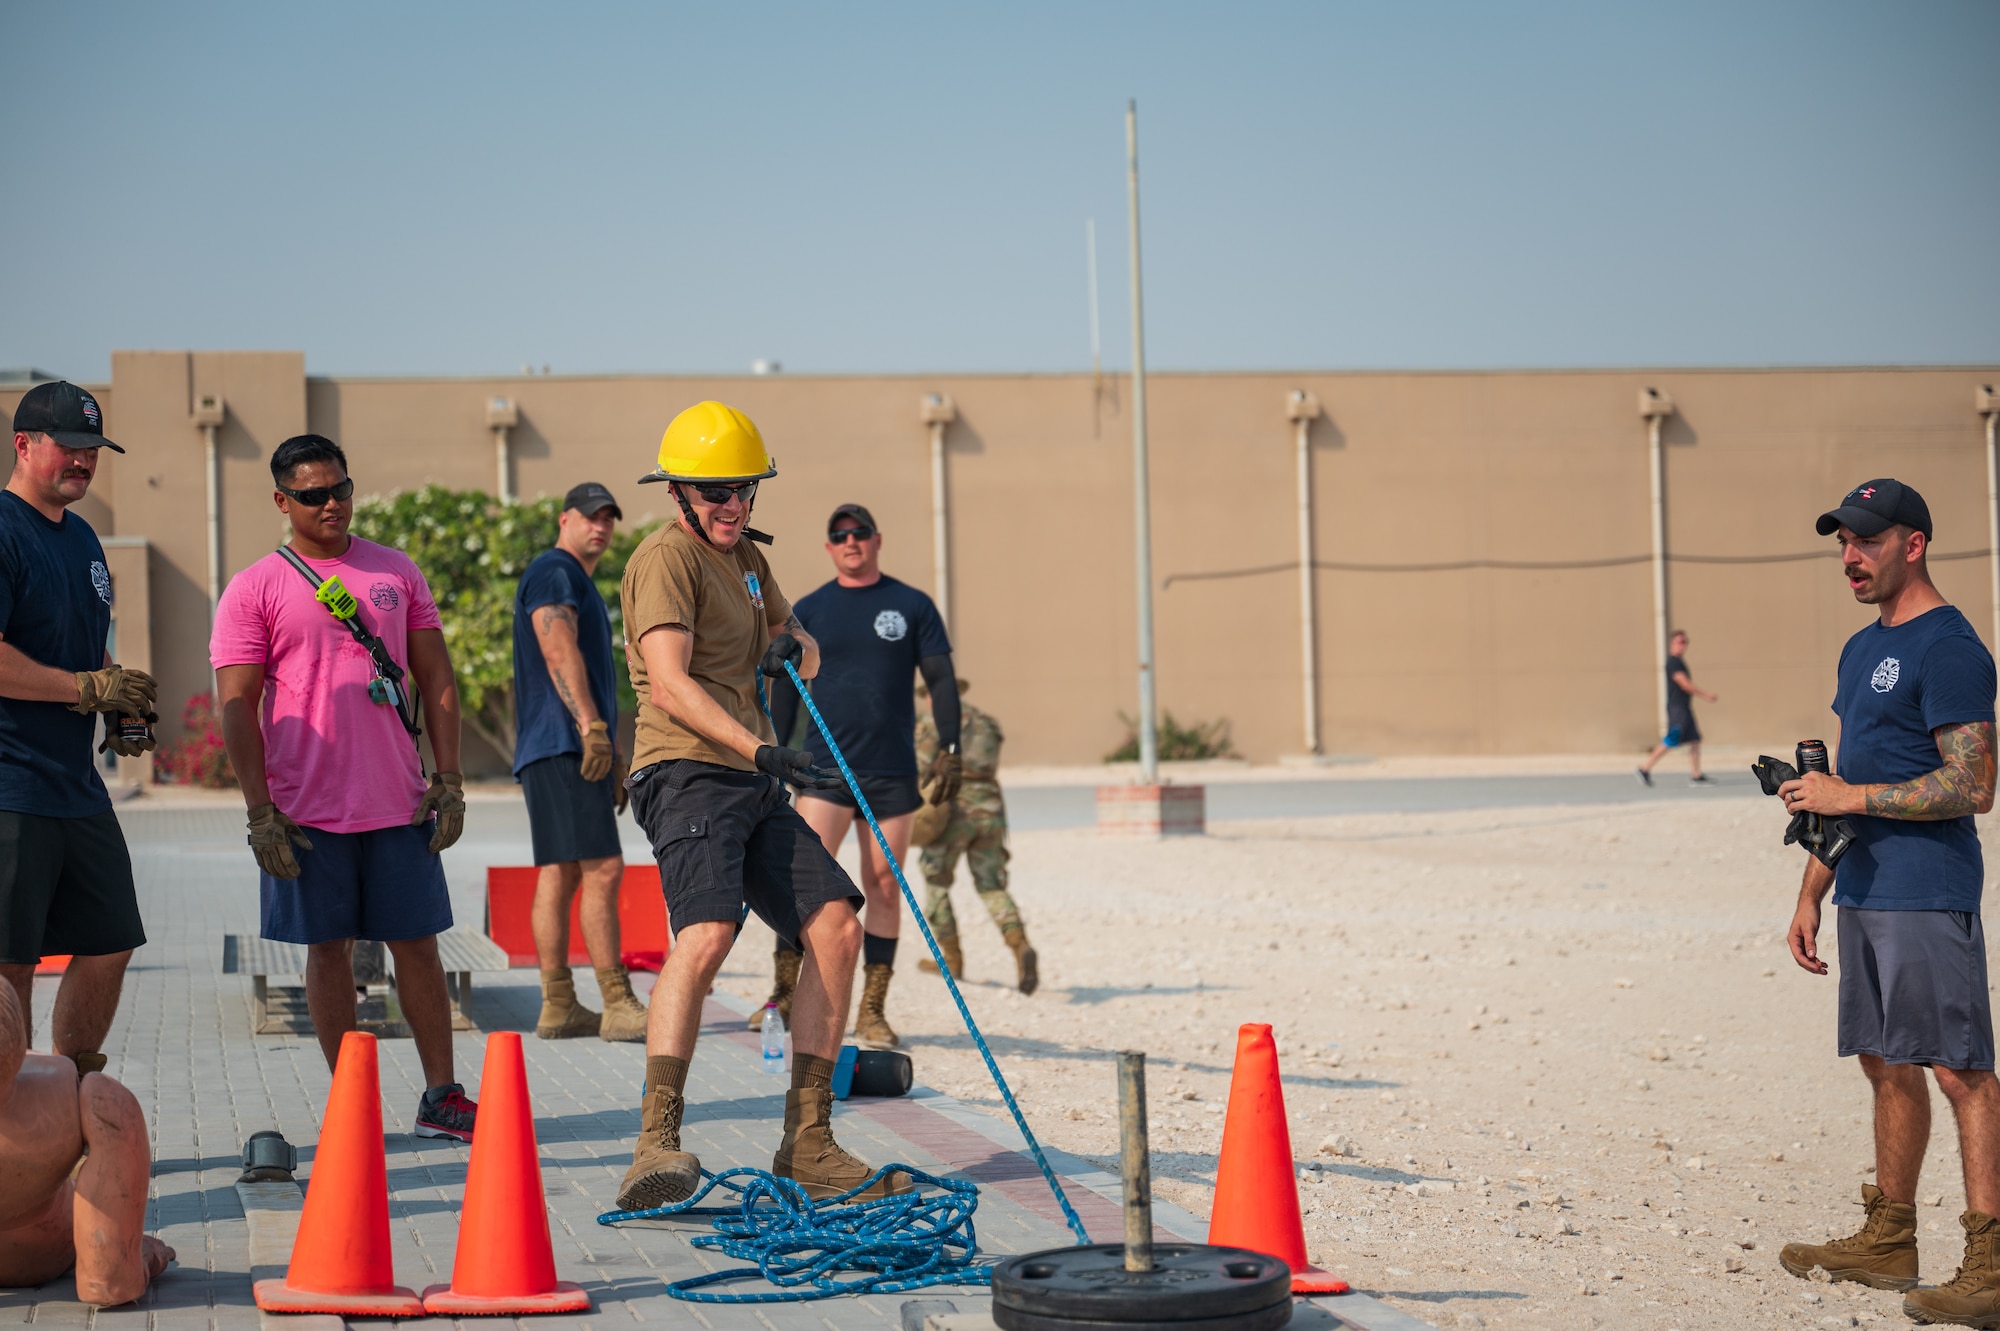 U.S. Air Force firefighters assigned to the 379th Expeditionary Civil Engineering Squadron drag a weighted sled while competing in the fire rodeo exercise Oct 15, 2022 at Al Udeid Air Base, Qatar. During fire safety week the firefighters conducted the fire rodeo where they hosted an open competition featuring elements of physical prowess needed to perform the lifesaving skills associated with their job. (U.S. Air Force photo by Staff Sgt. Dana Tourtellotte)